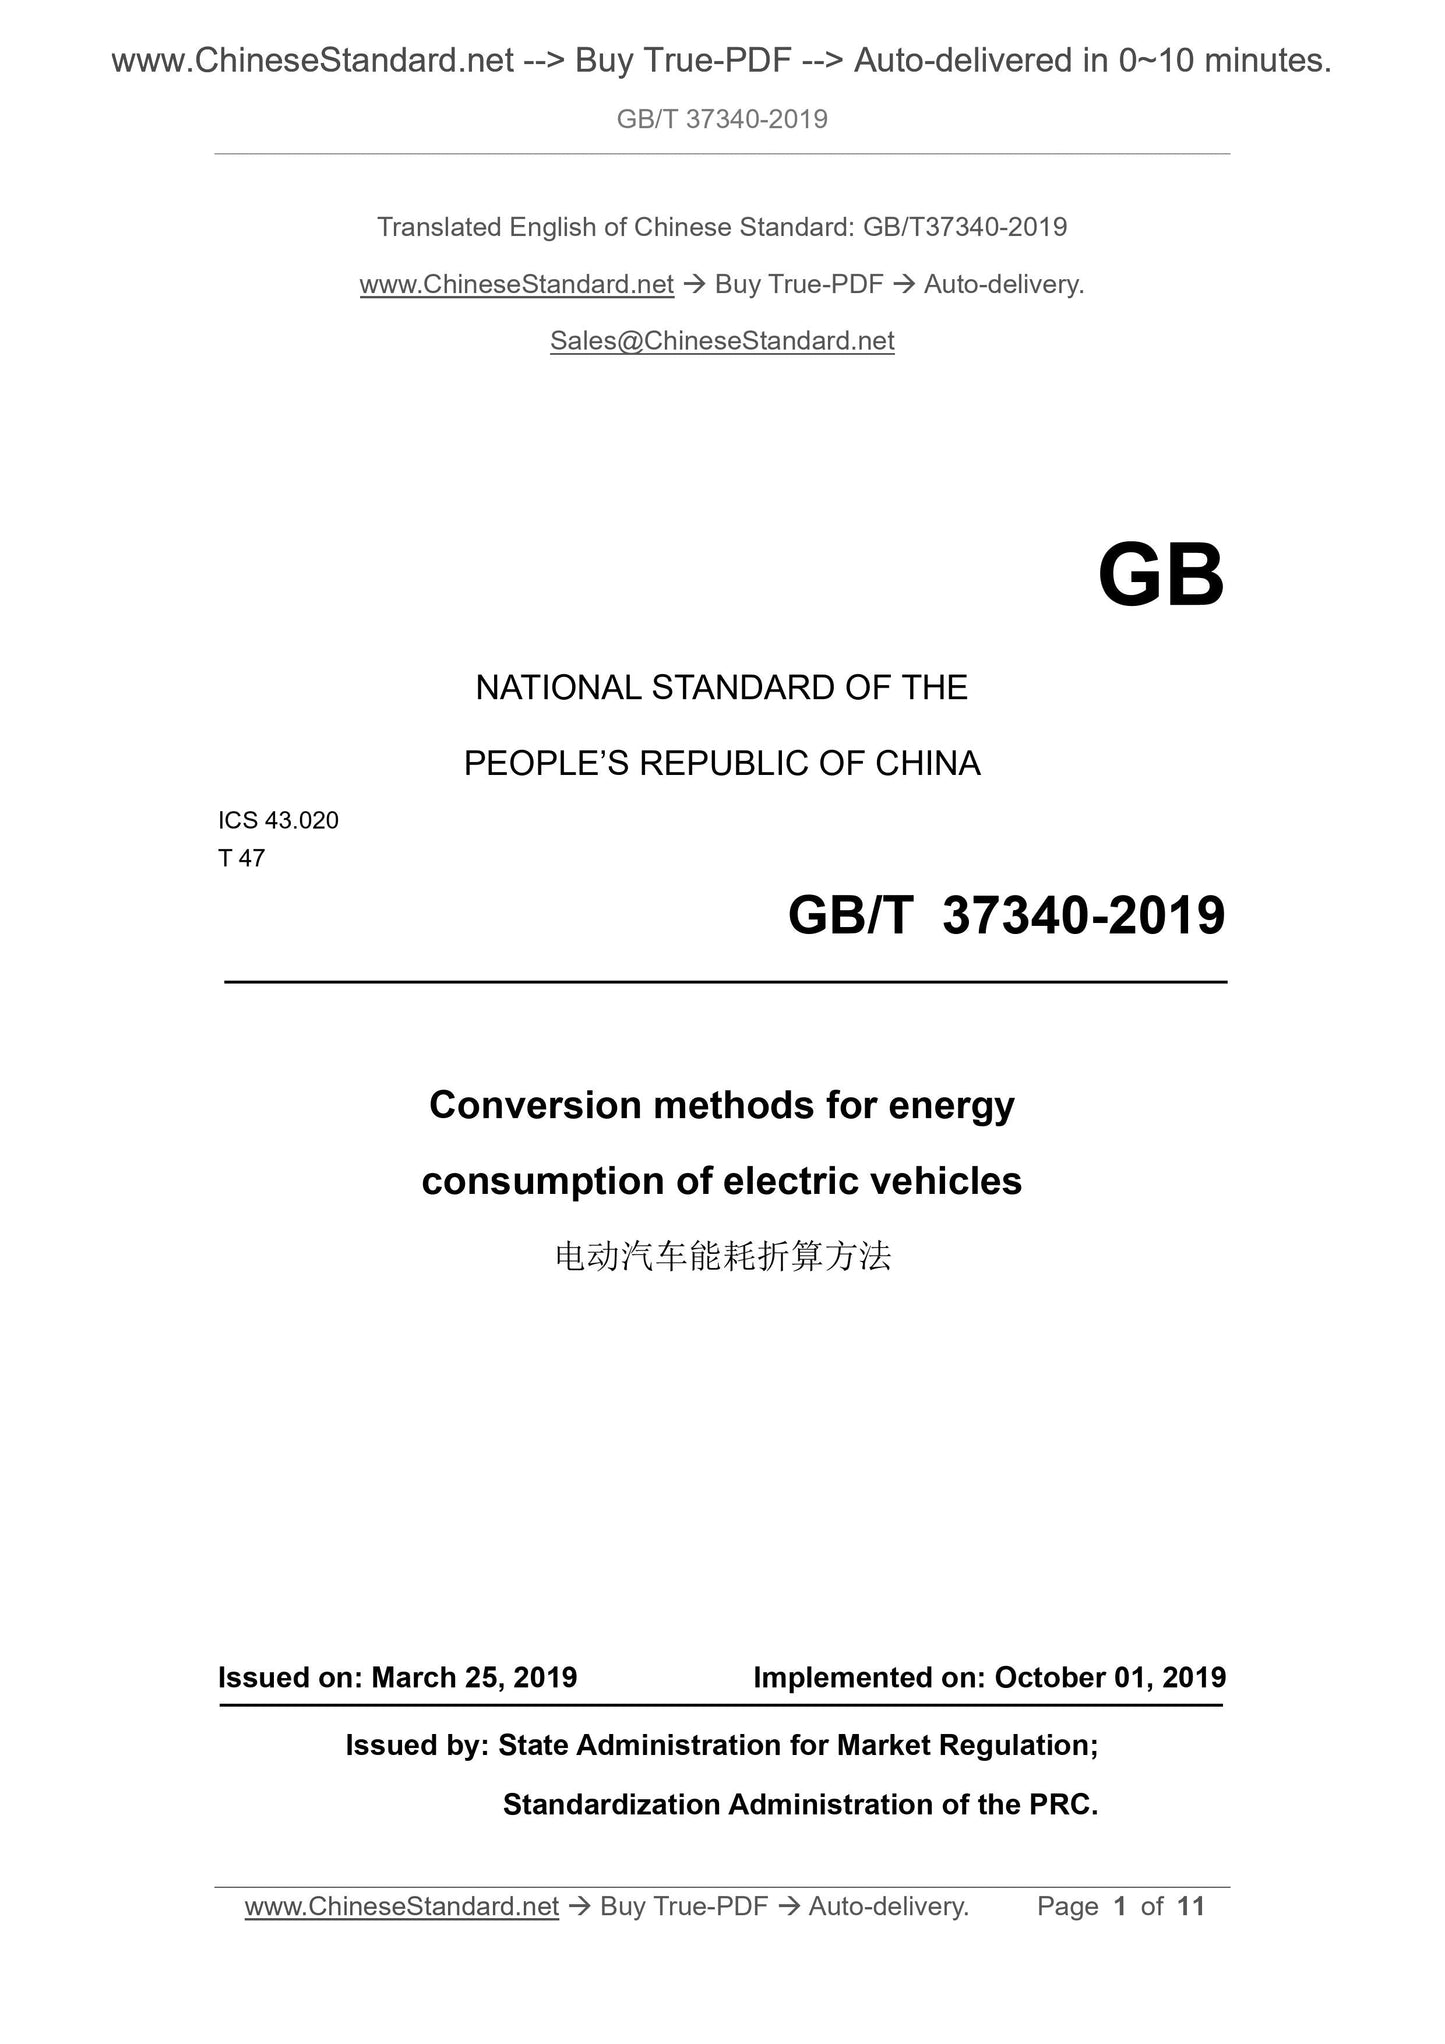 GB/T 37340-2019 Page 1